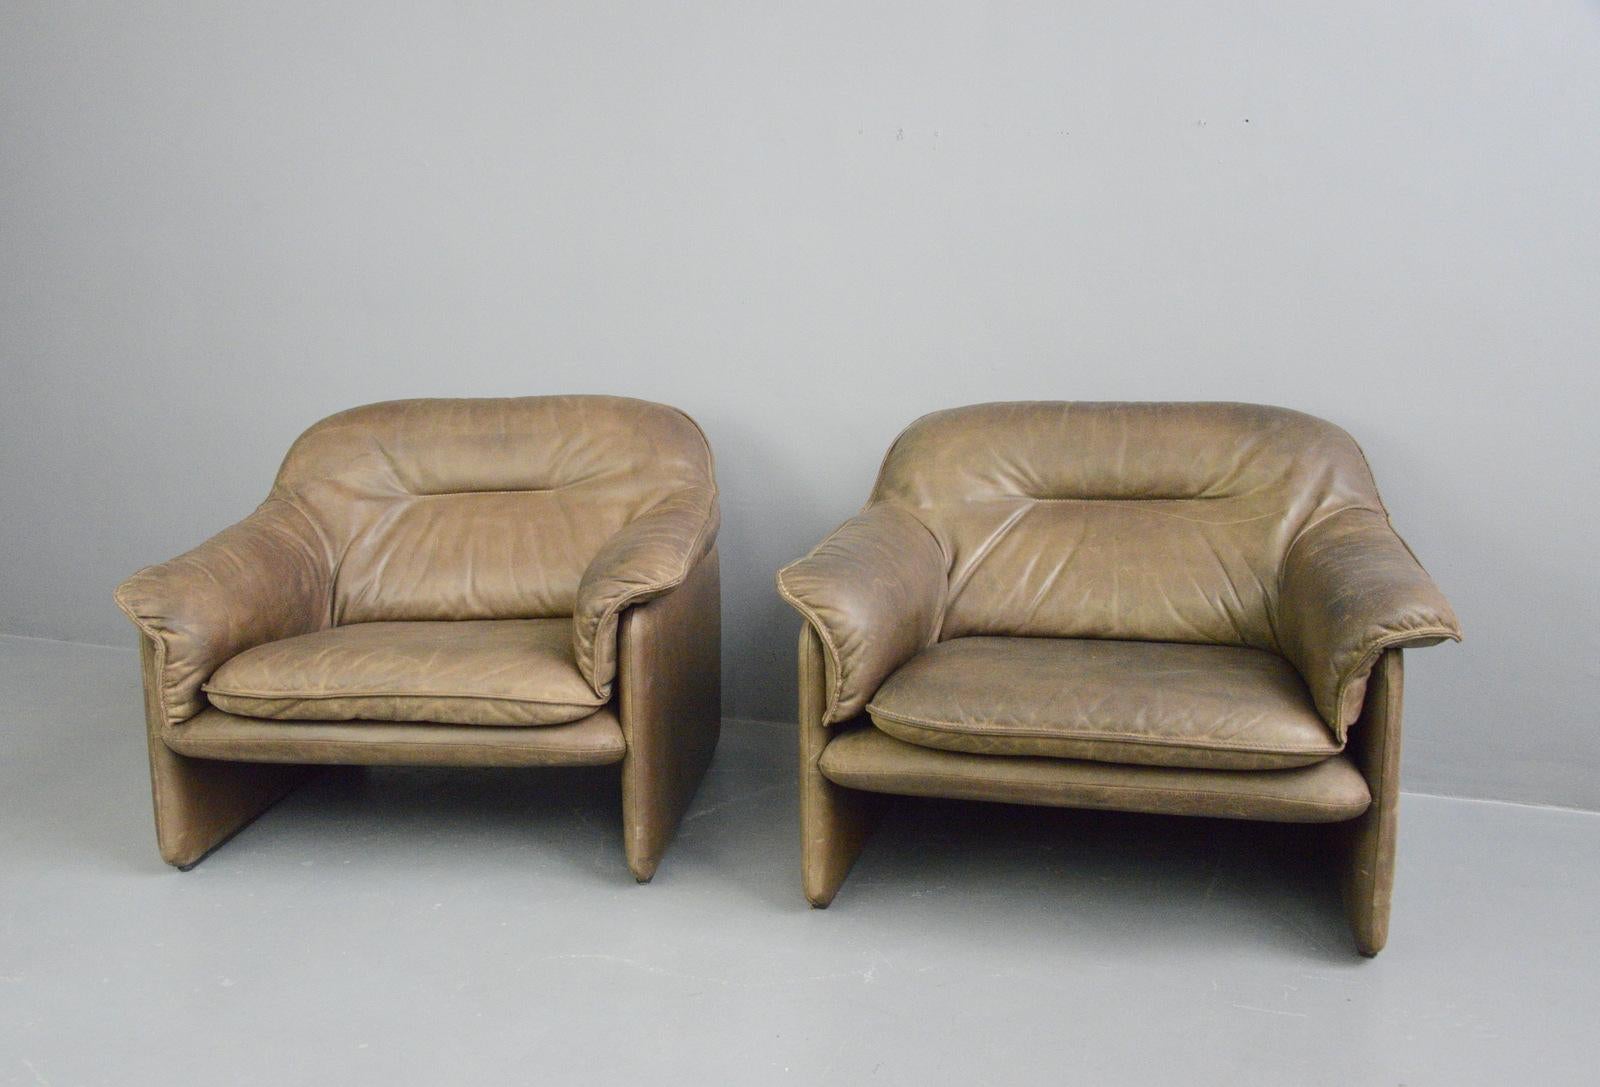 Midcentury leather chairs by De Sede, circa 1960s

- Price is per chair
- Quality buffalo leather
- Wooden feet
- Made by De Sede
- Swiss, 1960s
- Measures: 86 wide x 88cm deep x 71cm tall
- 38cm seat height

Condition report:

No rips